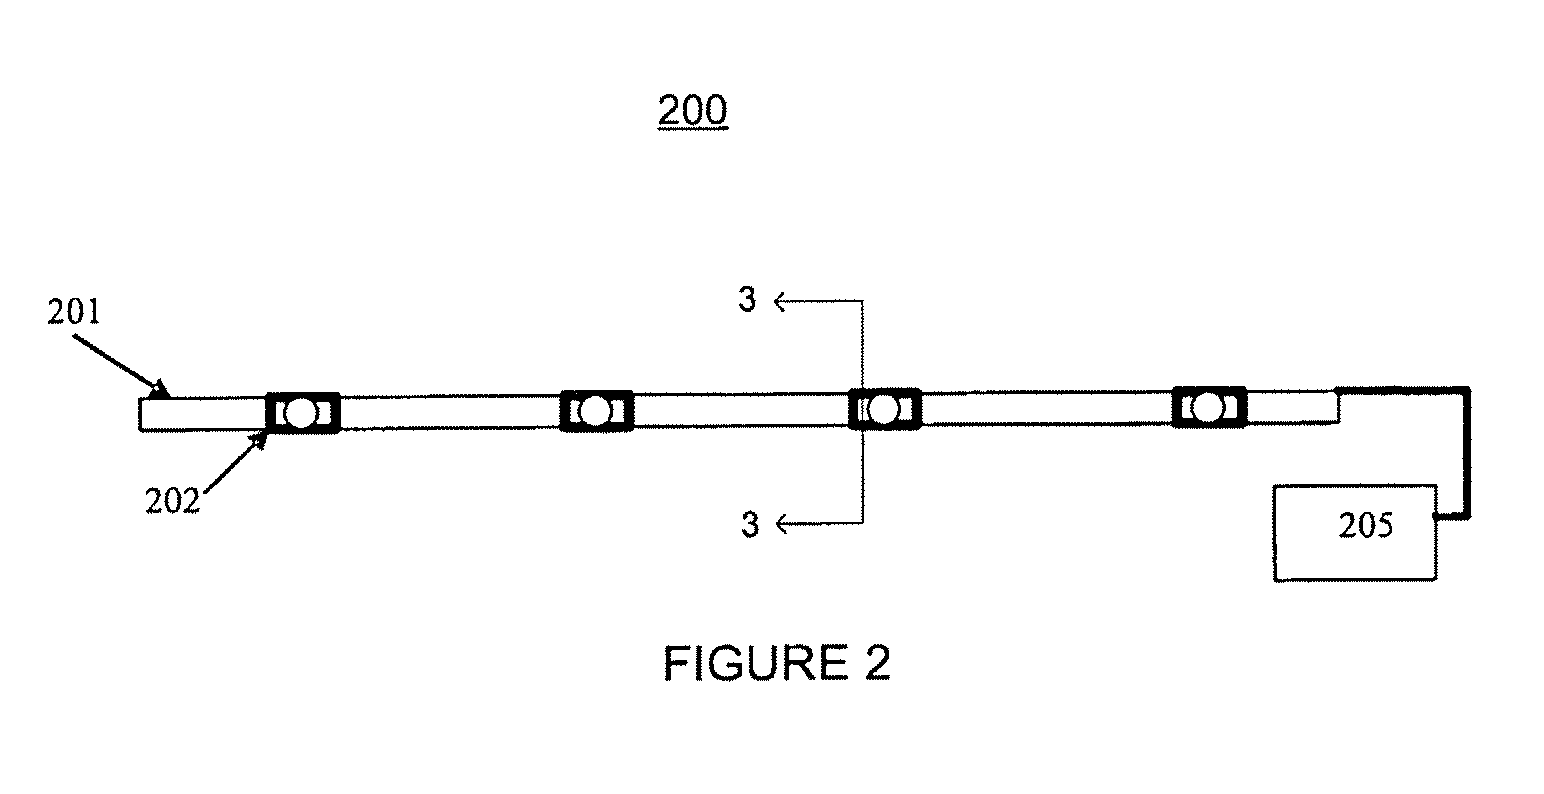 Integrally formed single piece light emitting diode light wire